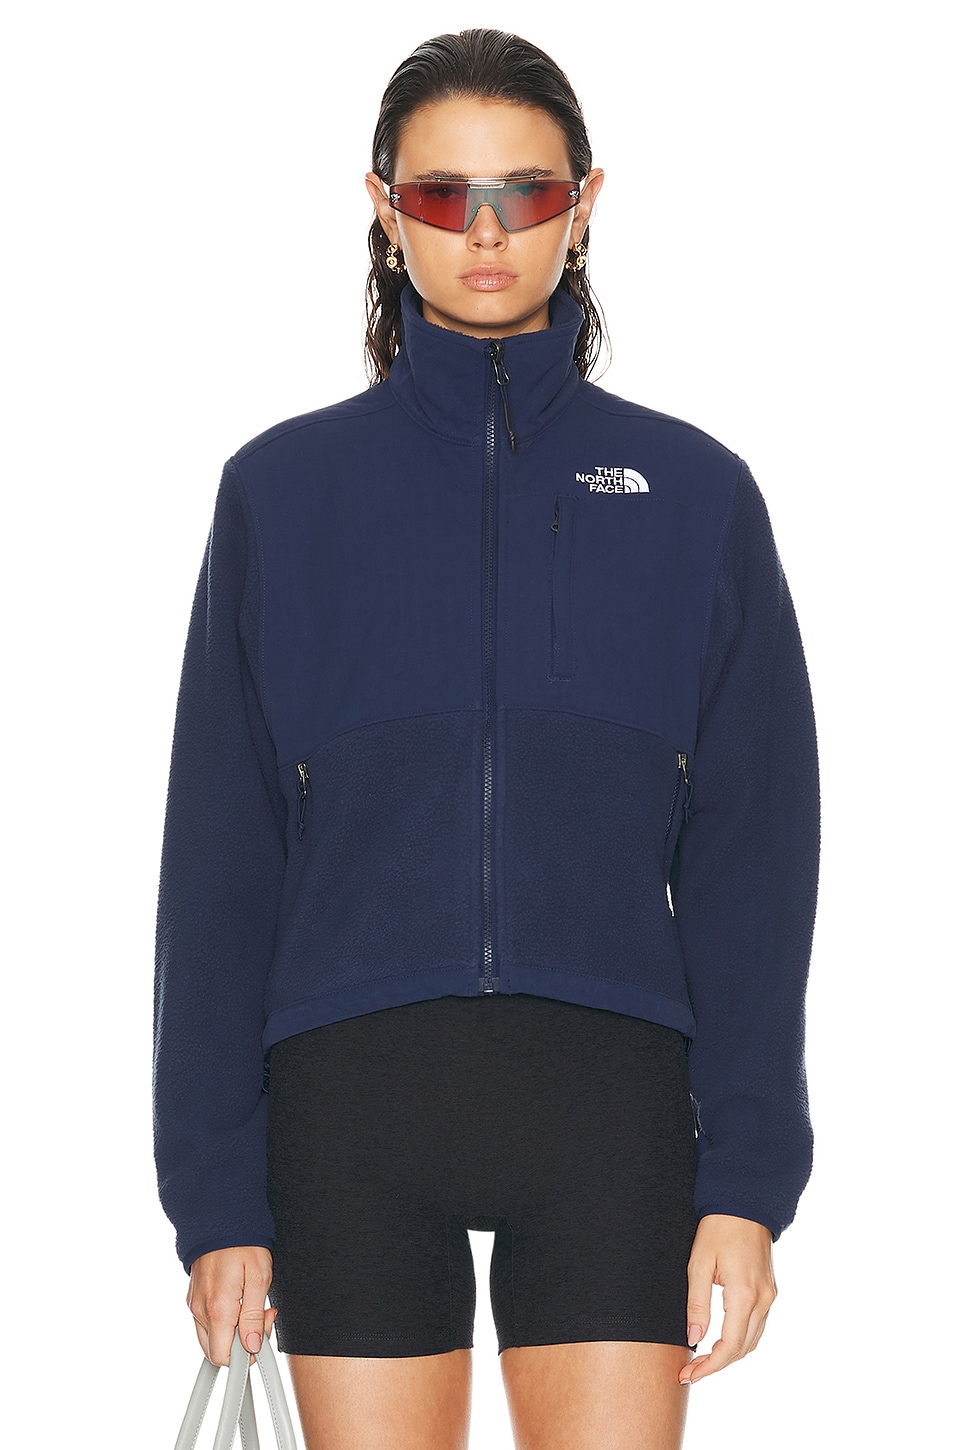 Image 1 of The North Face Denali Jacket in Summit Navy